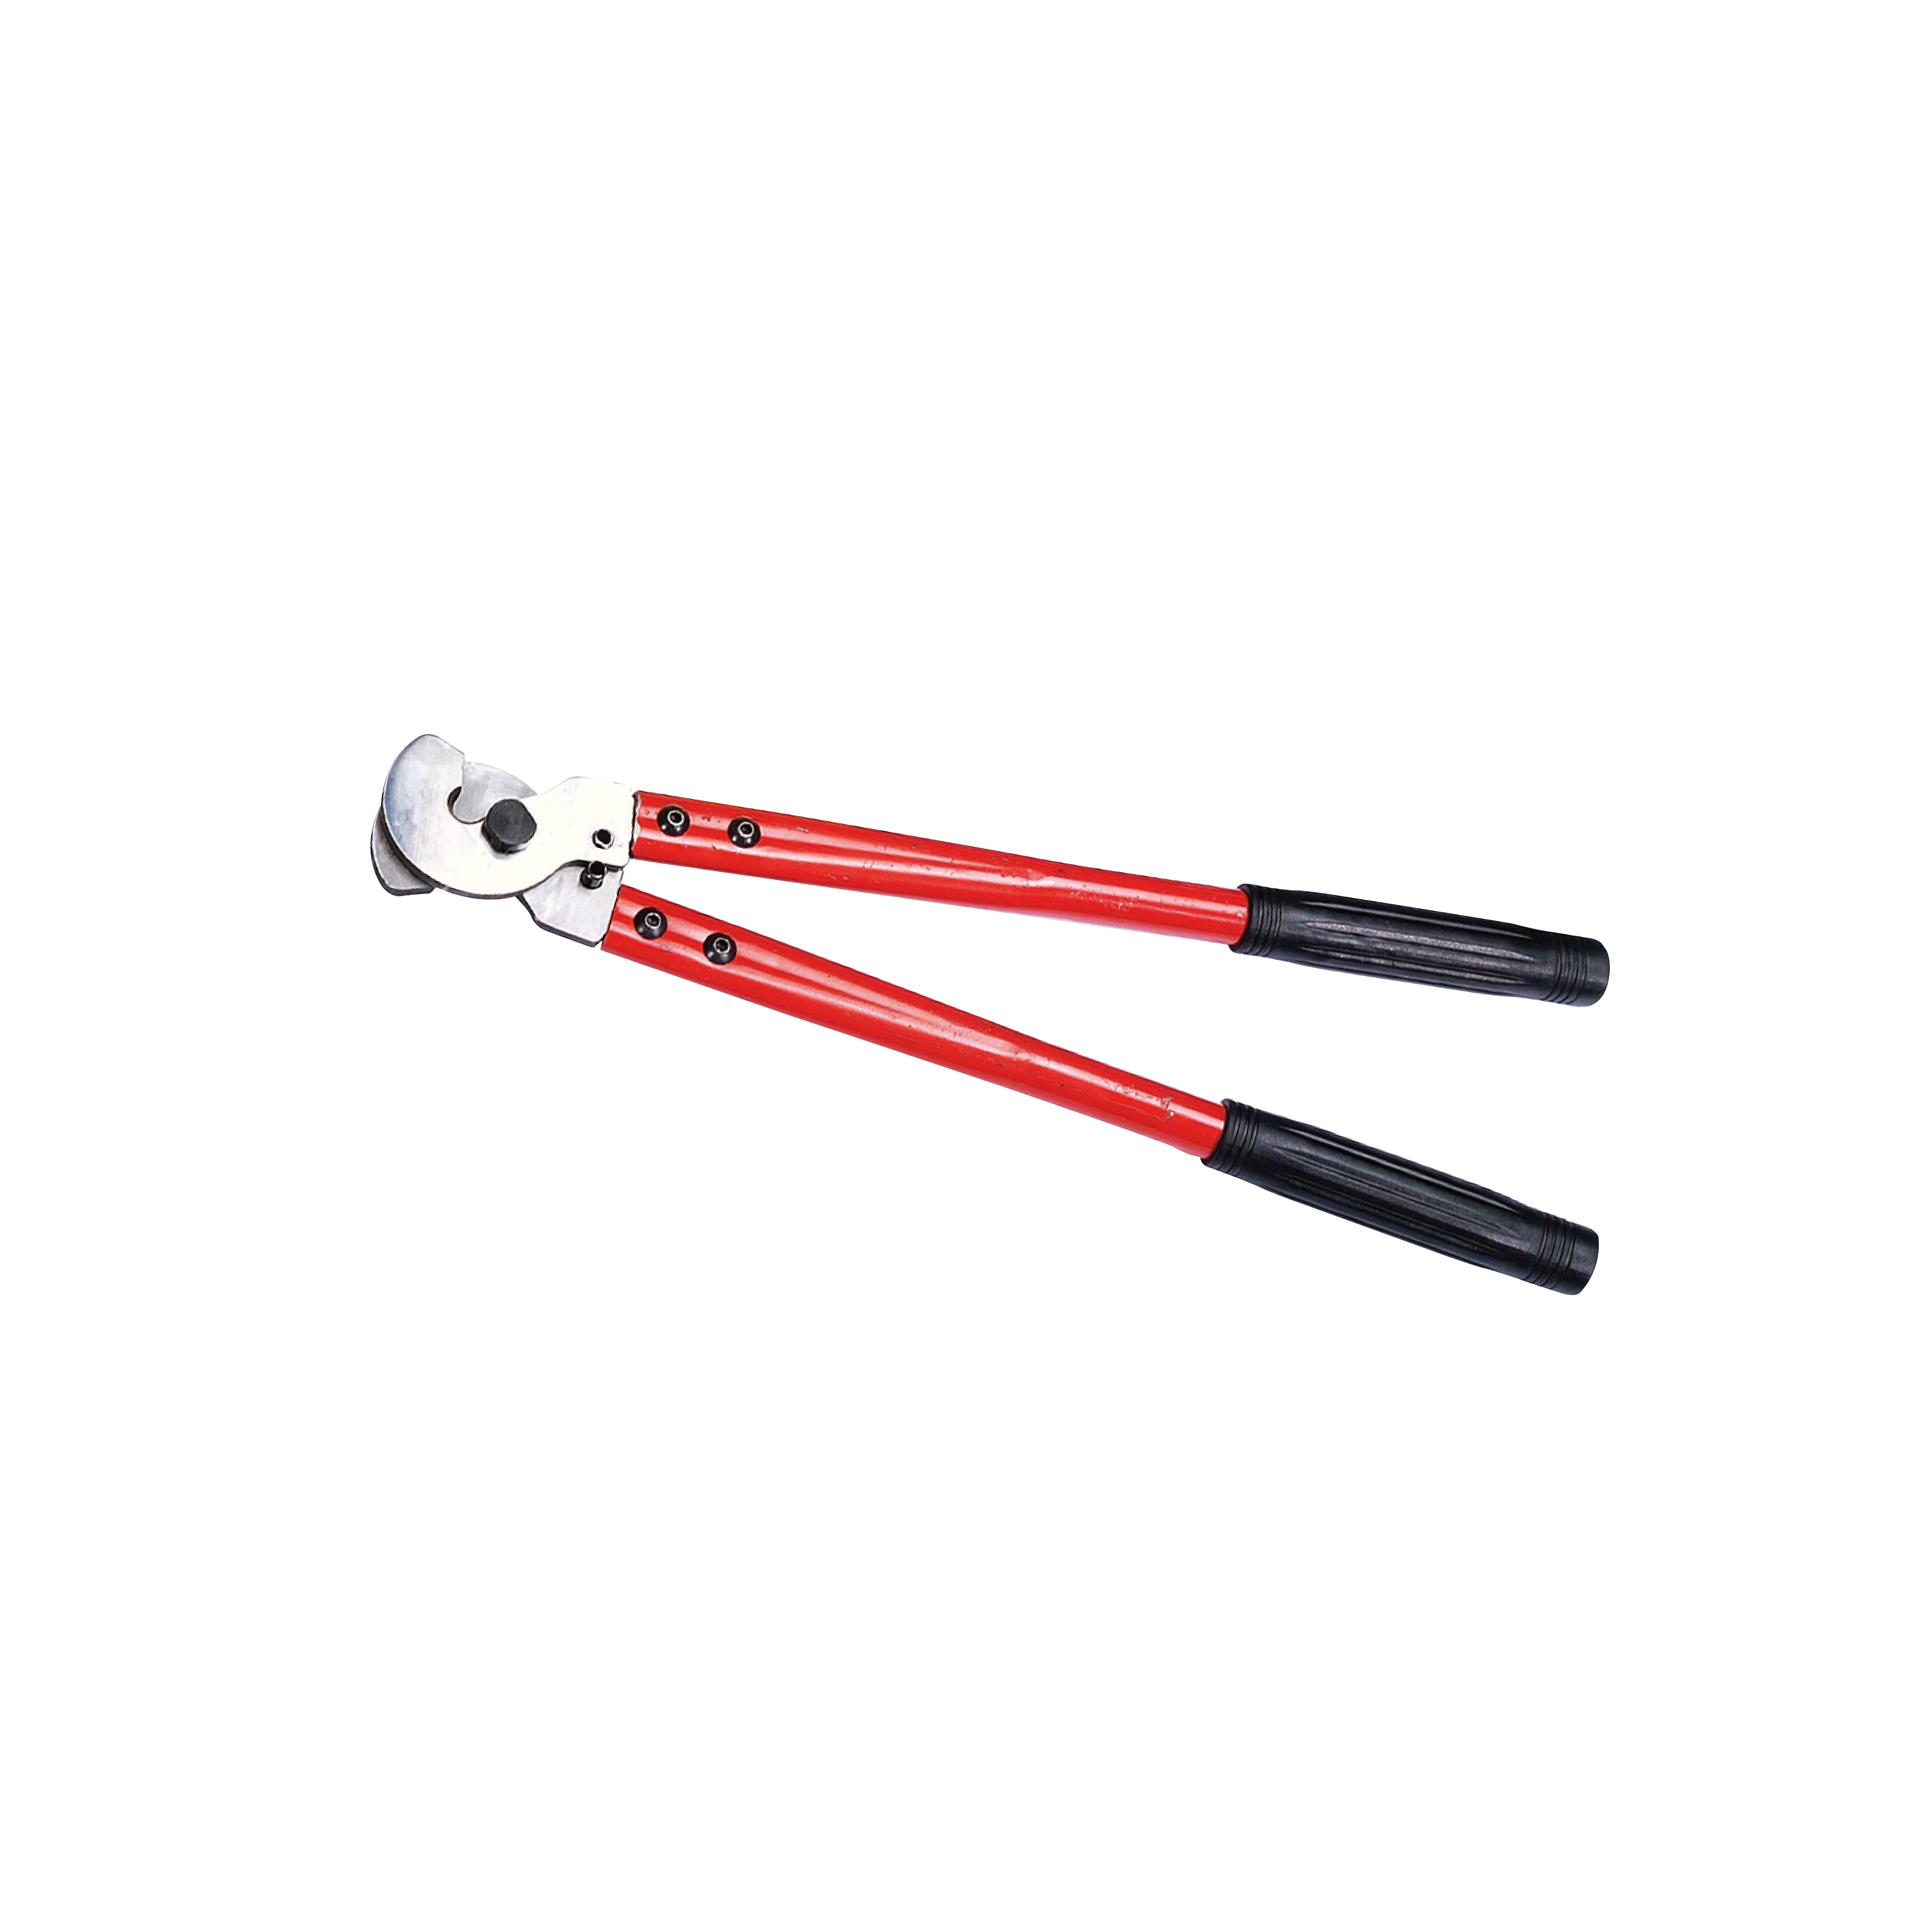 AC-100 HAND CABLE CUTTERS